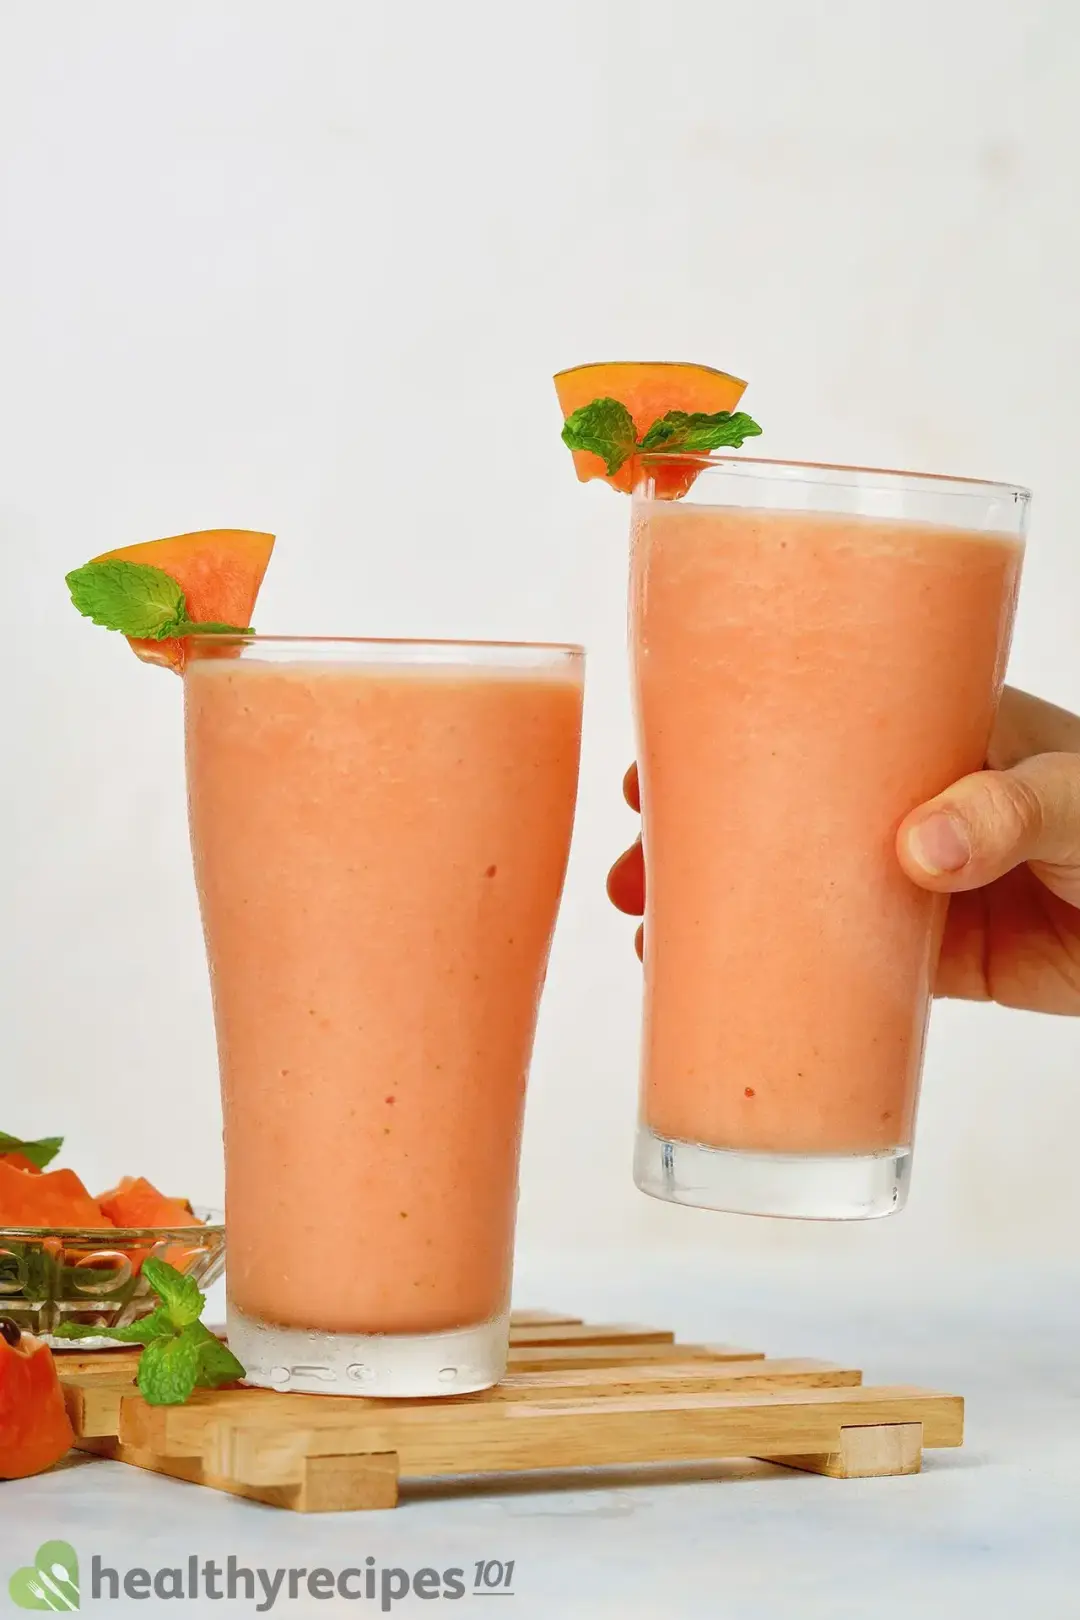 Papaya Smoothie Recipe: A Sweet, Rich, and Rehydrating Beverage